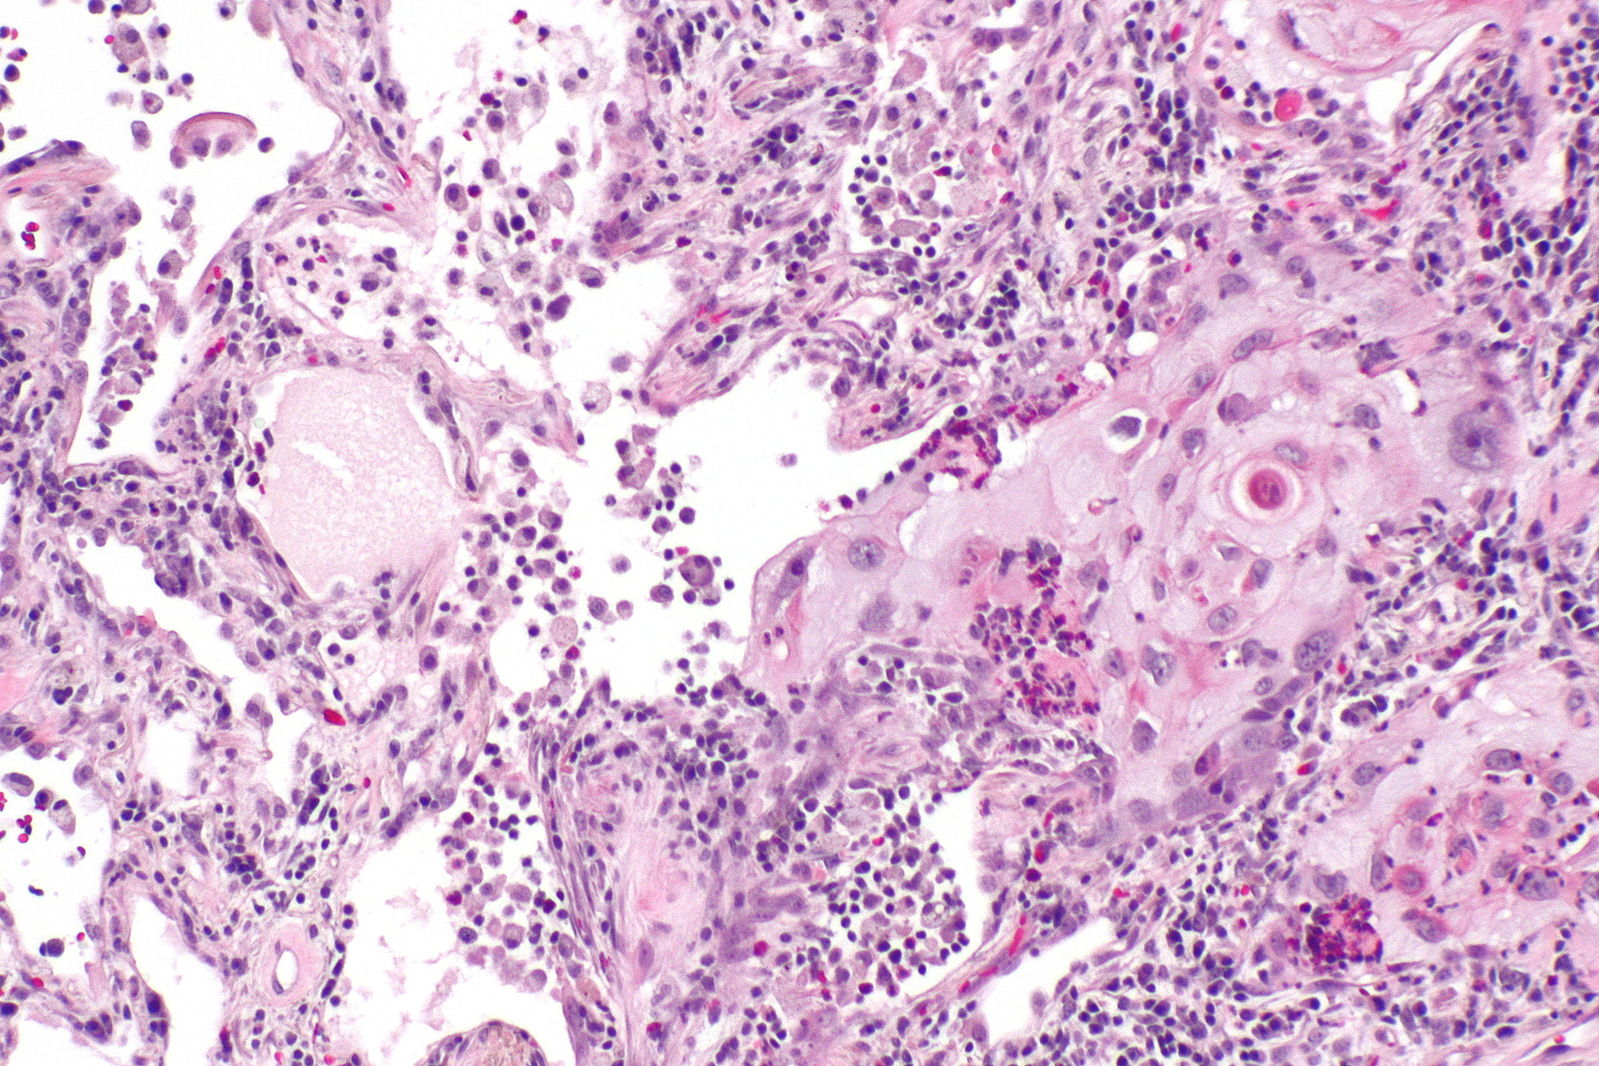 Micropathology: Squamous cell carcinoma of the lung. H&E stain via, Wikimedia Commons By Nephron (Own work)[7]